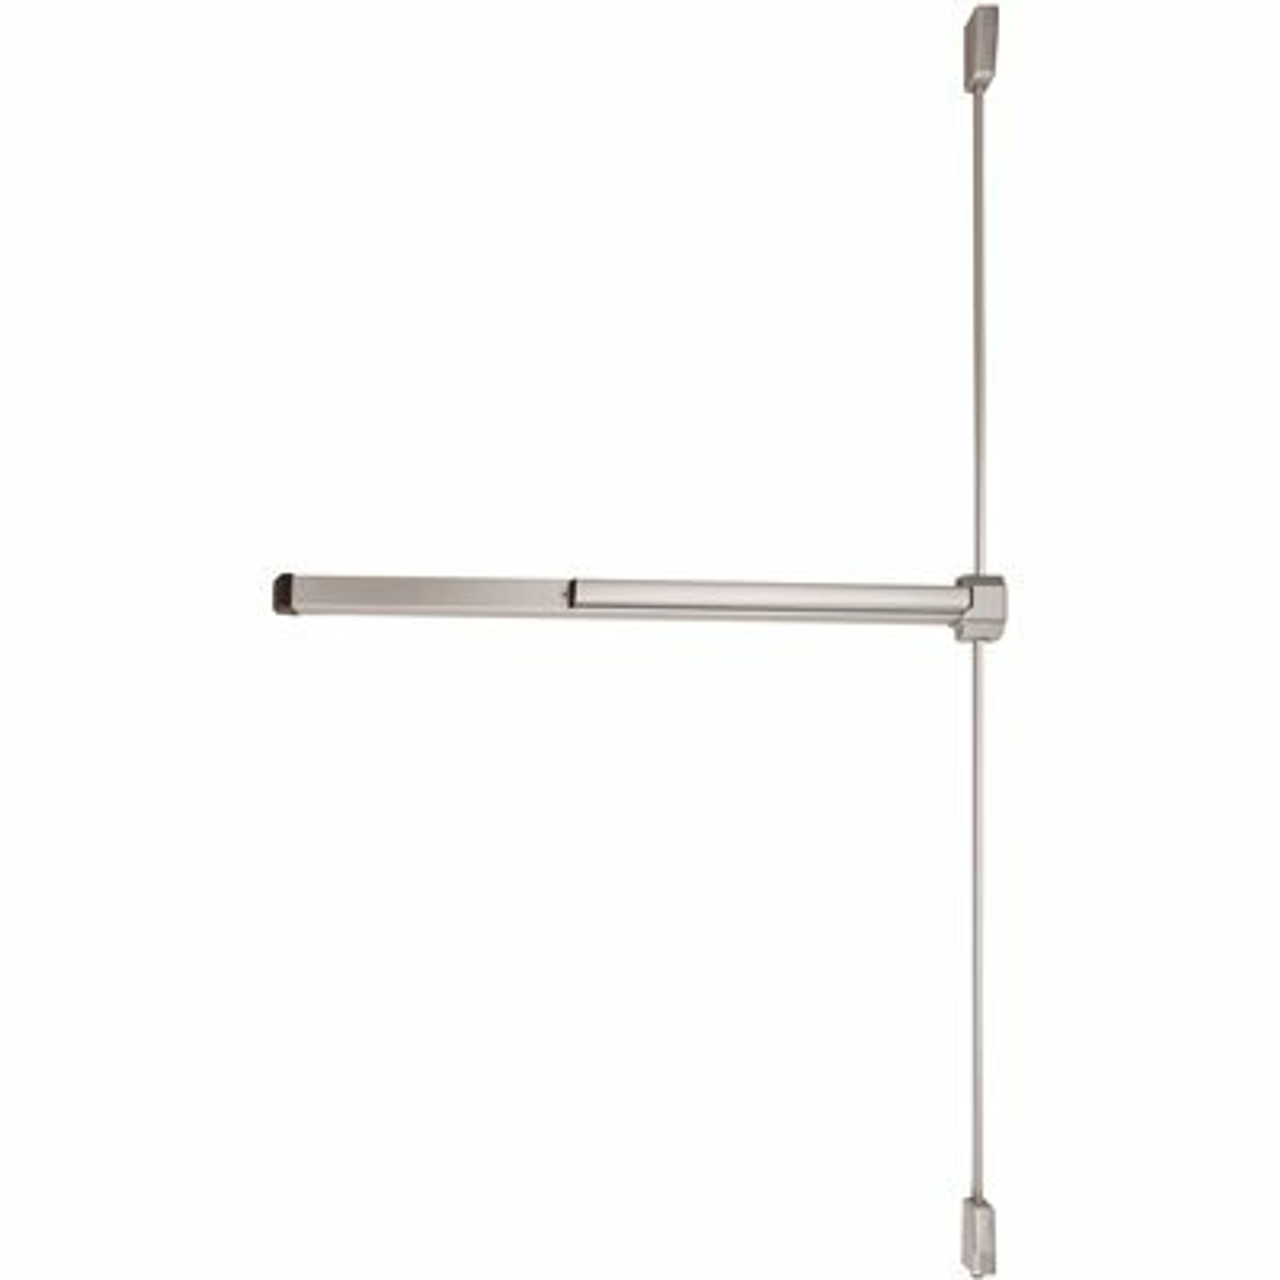 Von Duprin Grade-1 Stainless Steel Surface Vertical Rod Exit Device, Non-Handed, Exit Only - 310013239